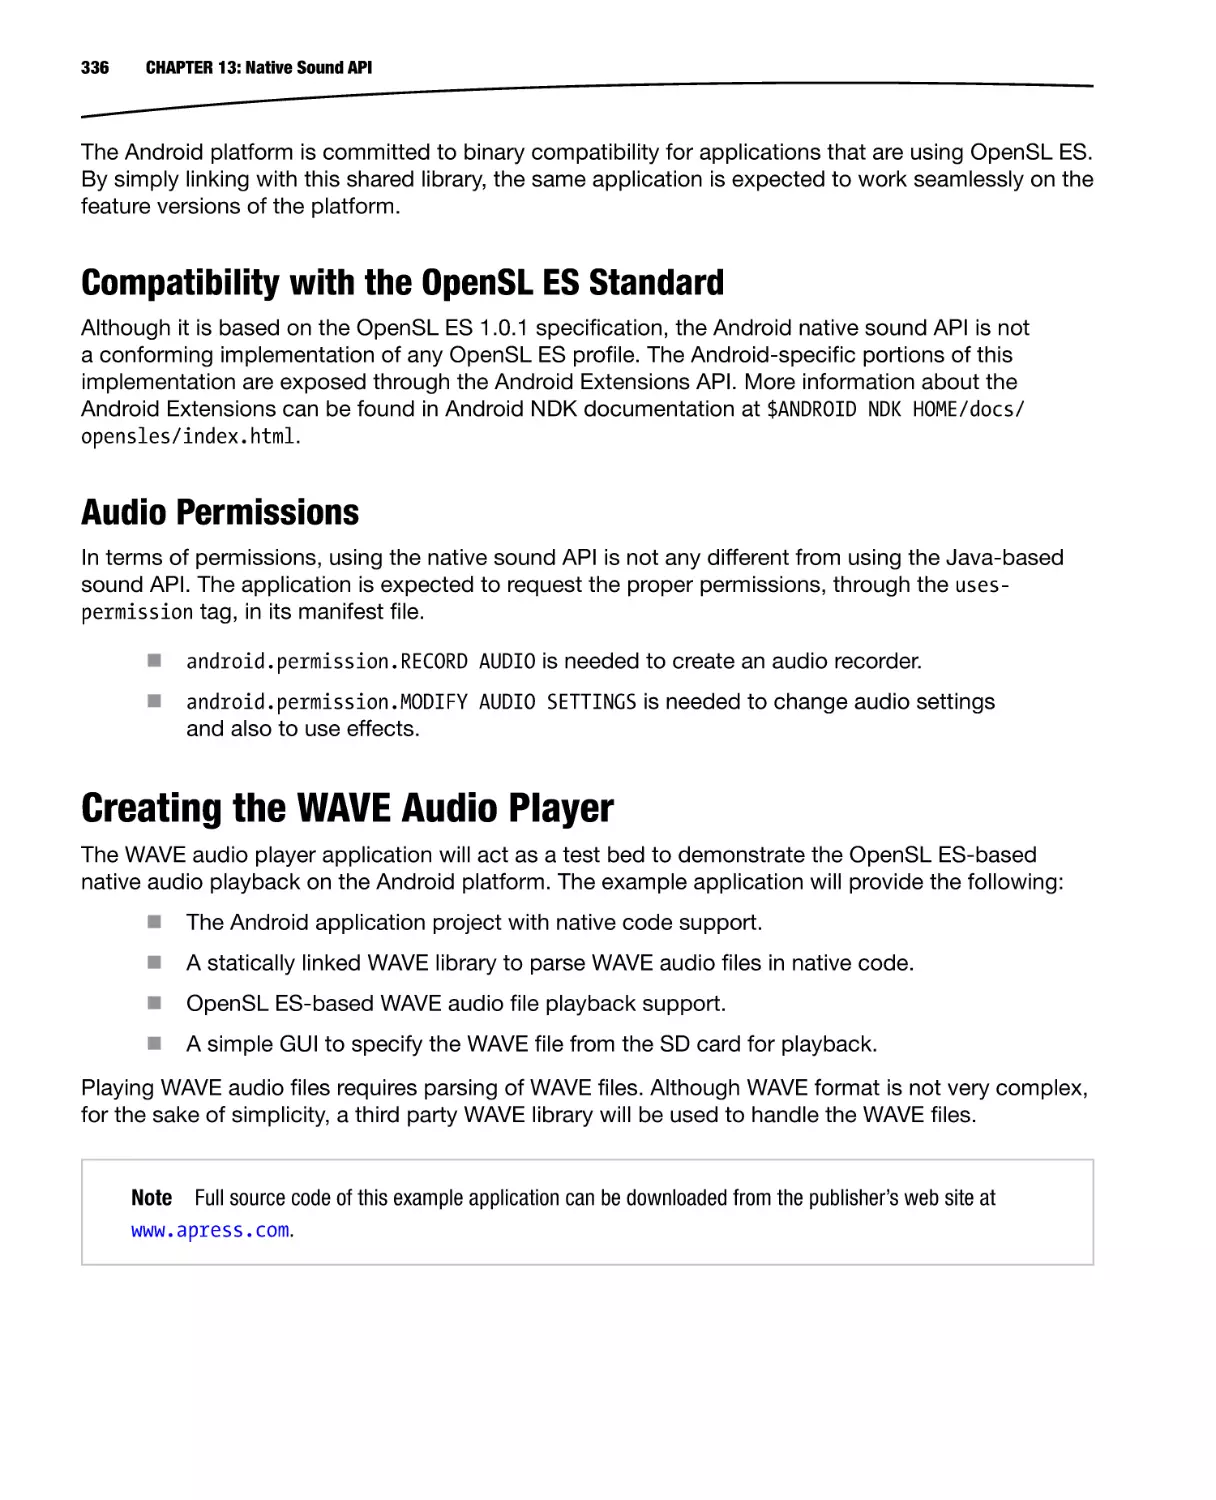 Compatibility with the OpenSL ES Standard
Audio Permissions
Creating the WAVE Audio Player